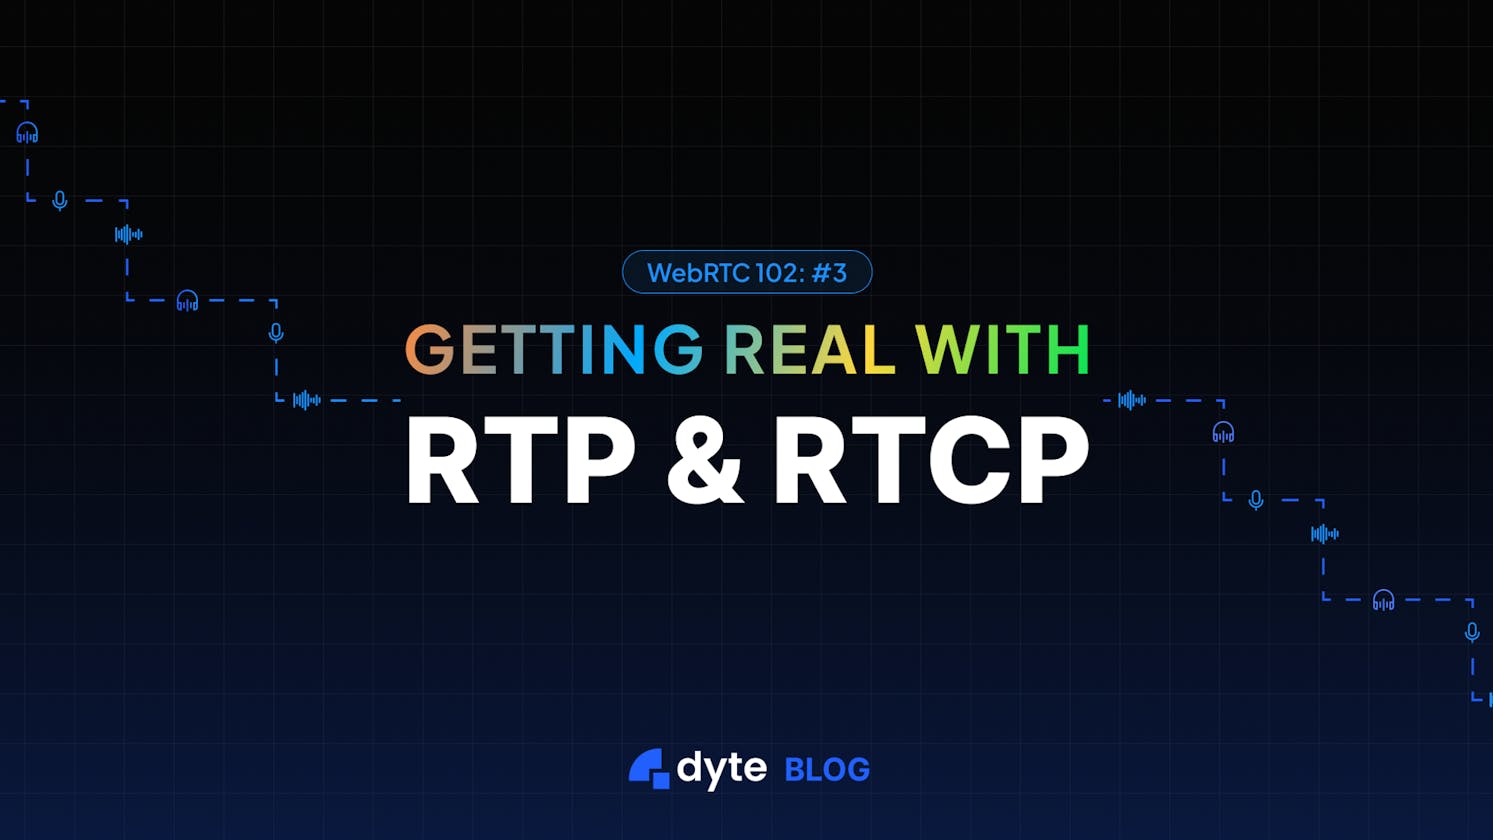 WebRTC 102: #3 Getting Real with RTP and RTCP